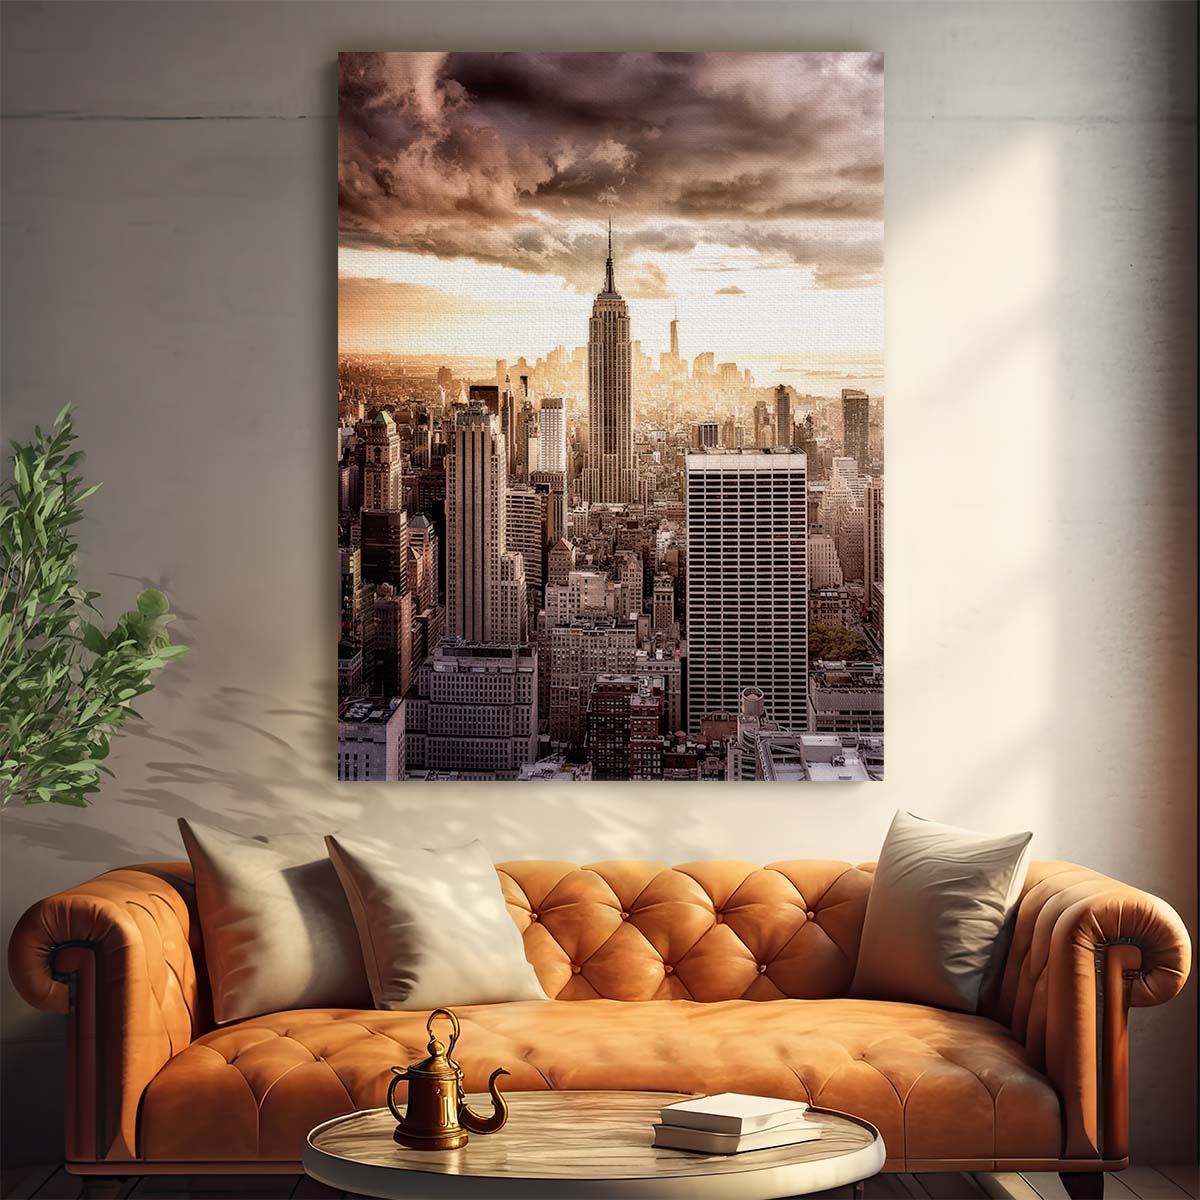 Golden Sunset Over NYC's Iconic Empire State Building Photography by Luxuriance Designs, made in USA